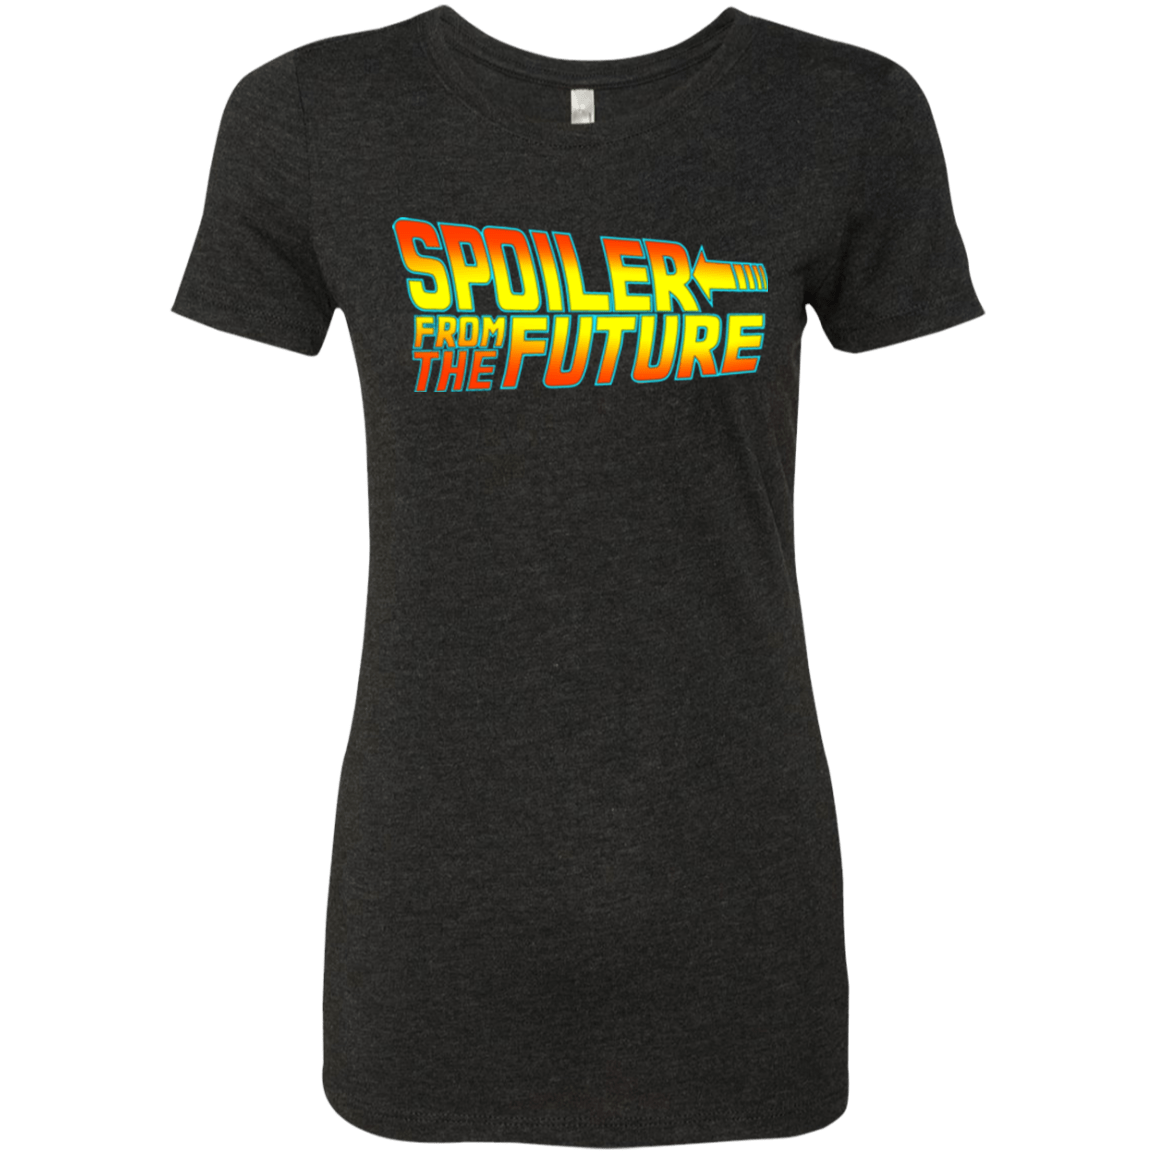 T-Shirts Vintage Black / Small Spoiler from the future Women's Triblend T-Shirt